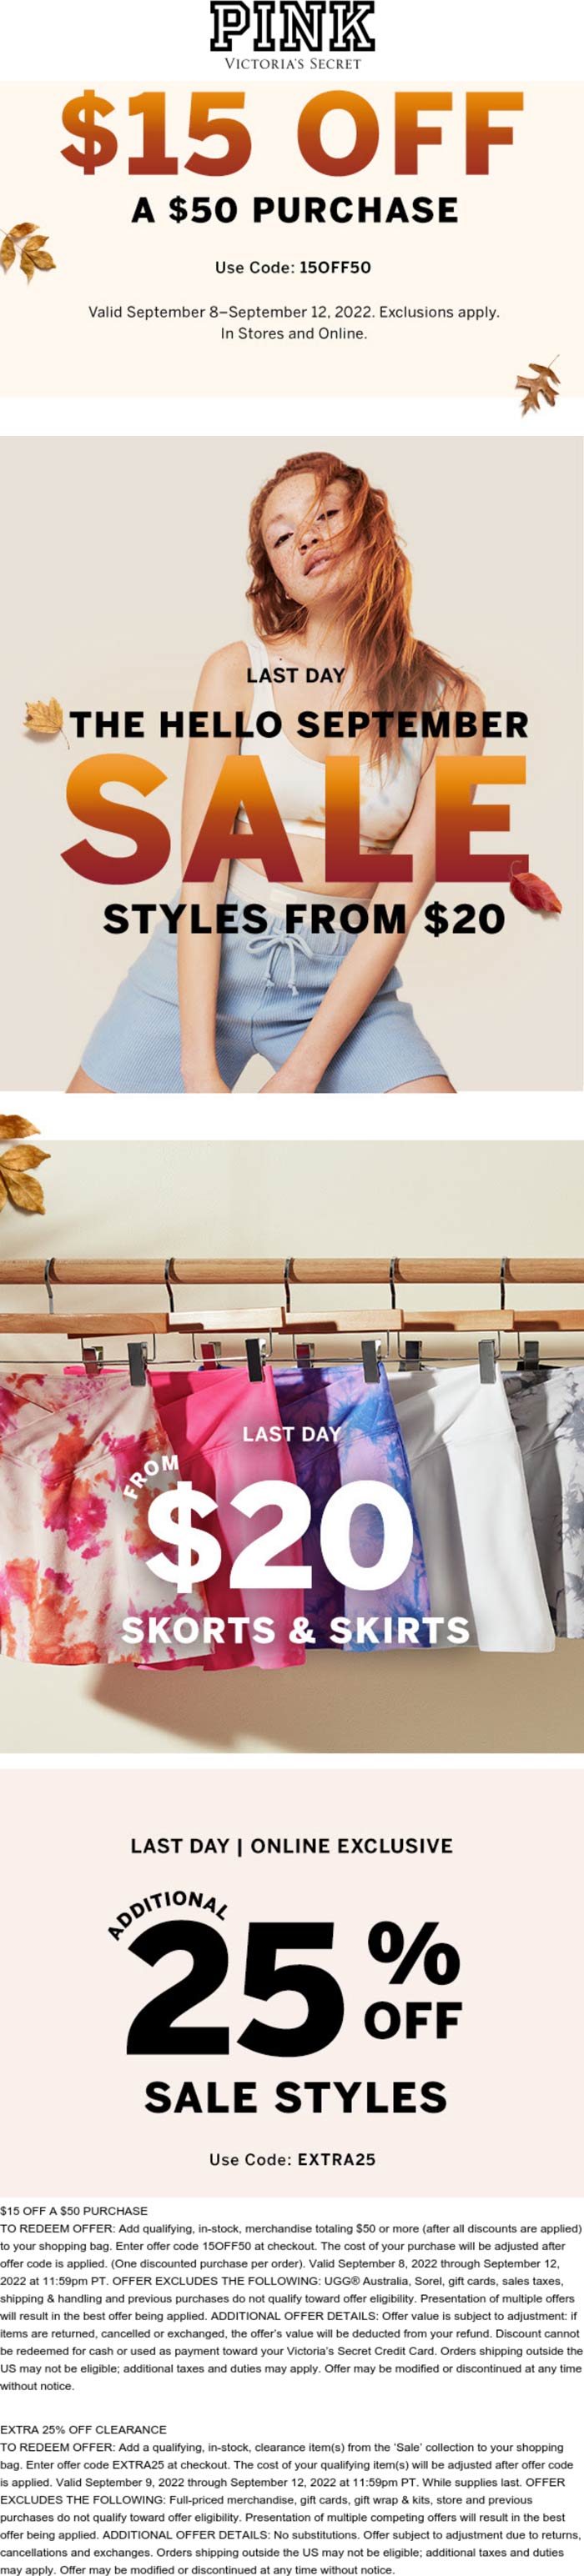 PINK stores Coupon  $15 off $50 today at PINK, or online via promo code 15OFF50 #pink 